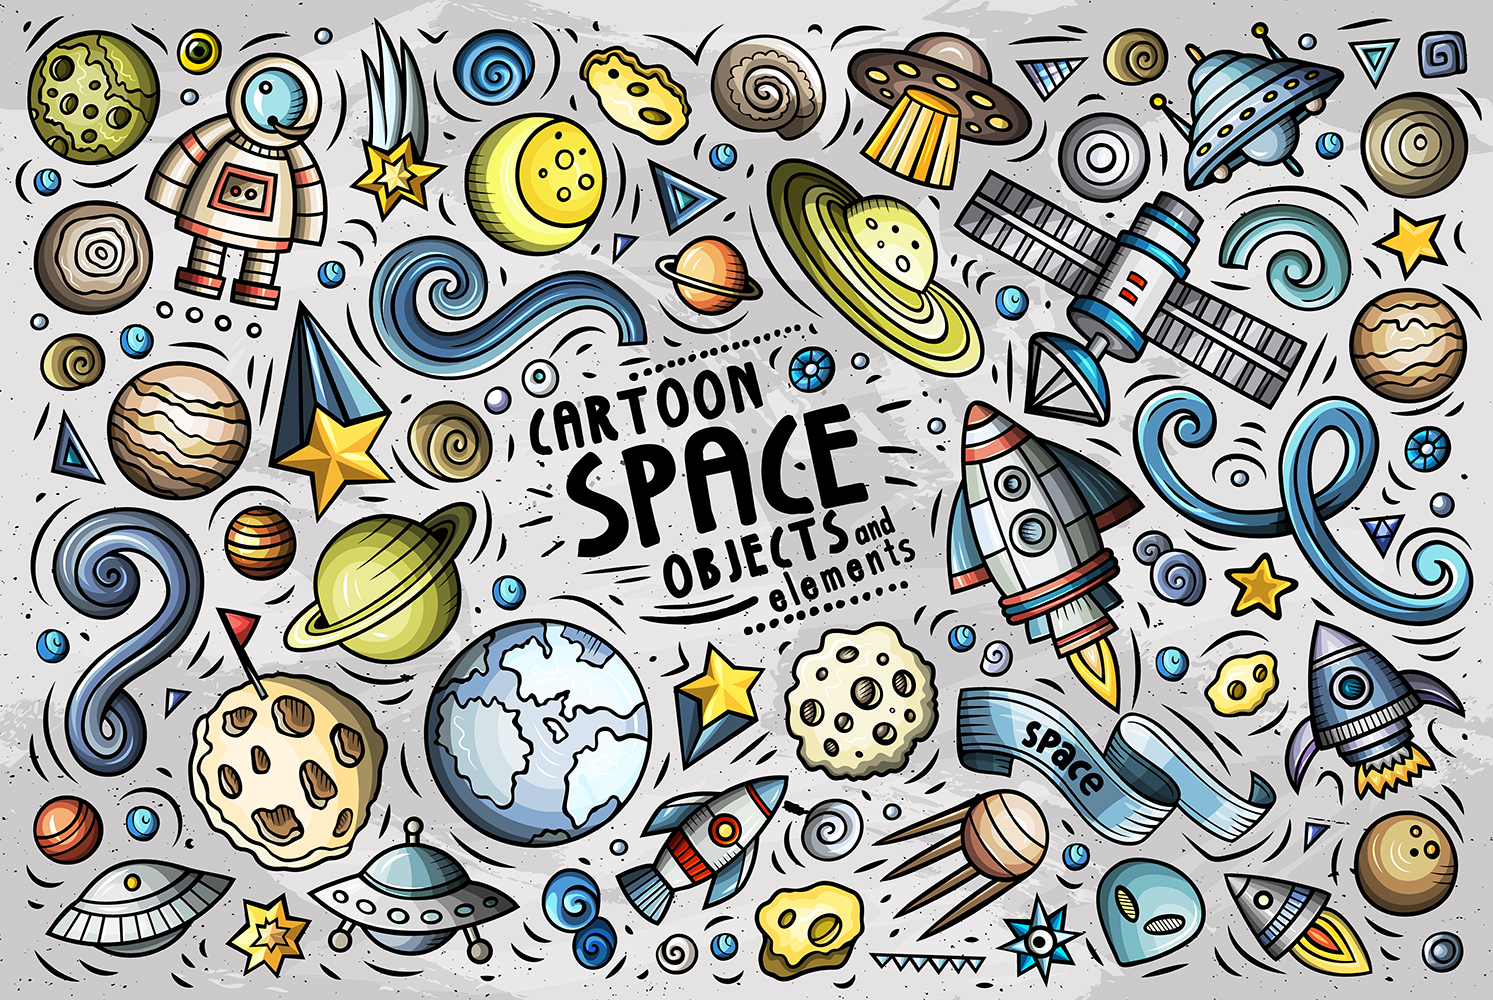 Space Cartoon Doodle Objects Set - Vector Image